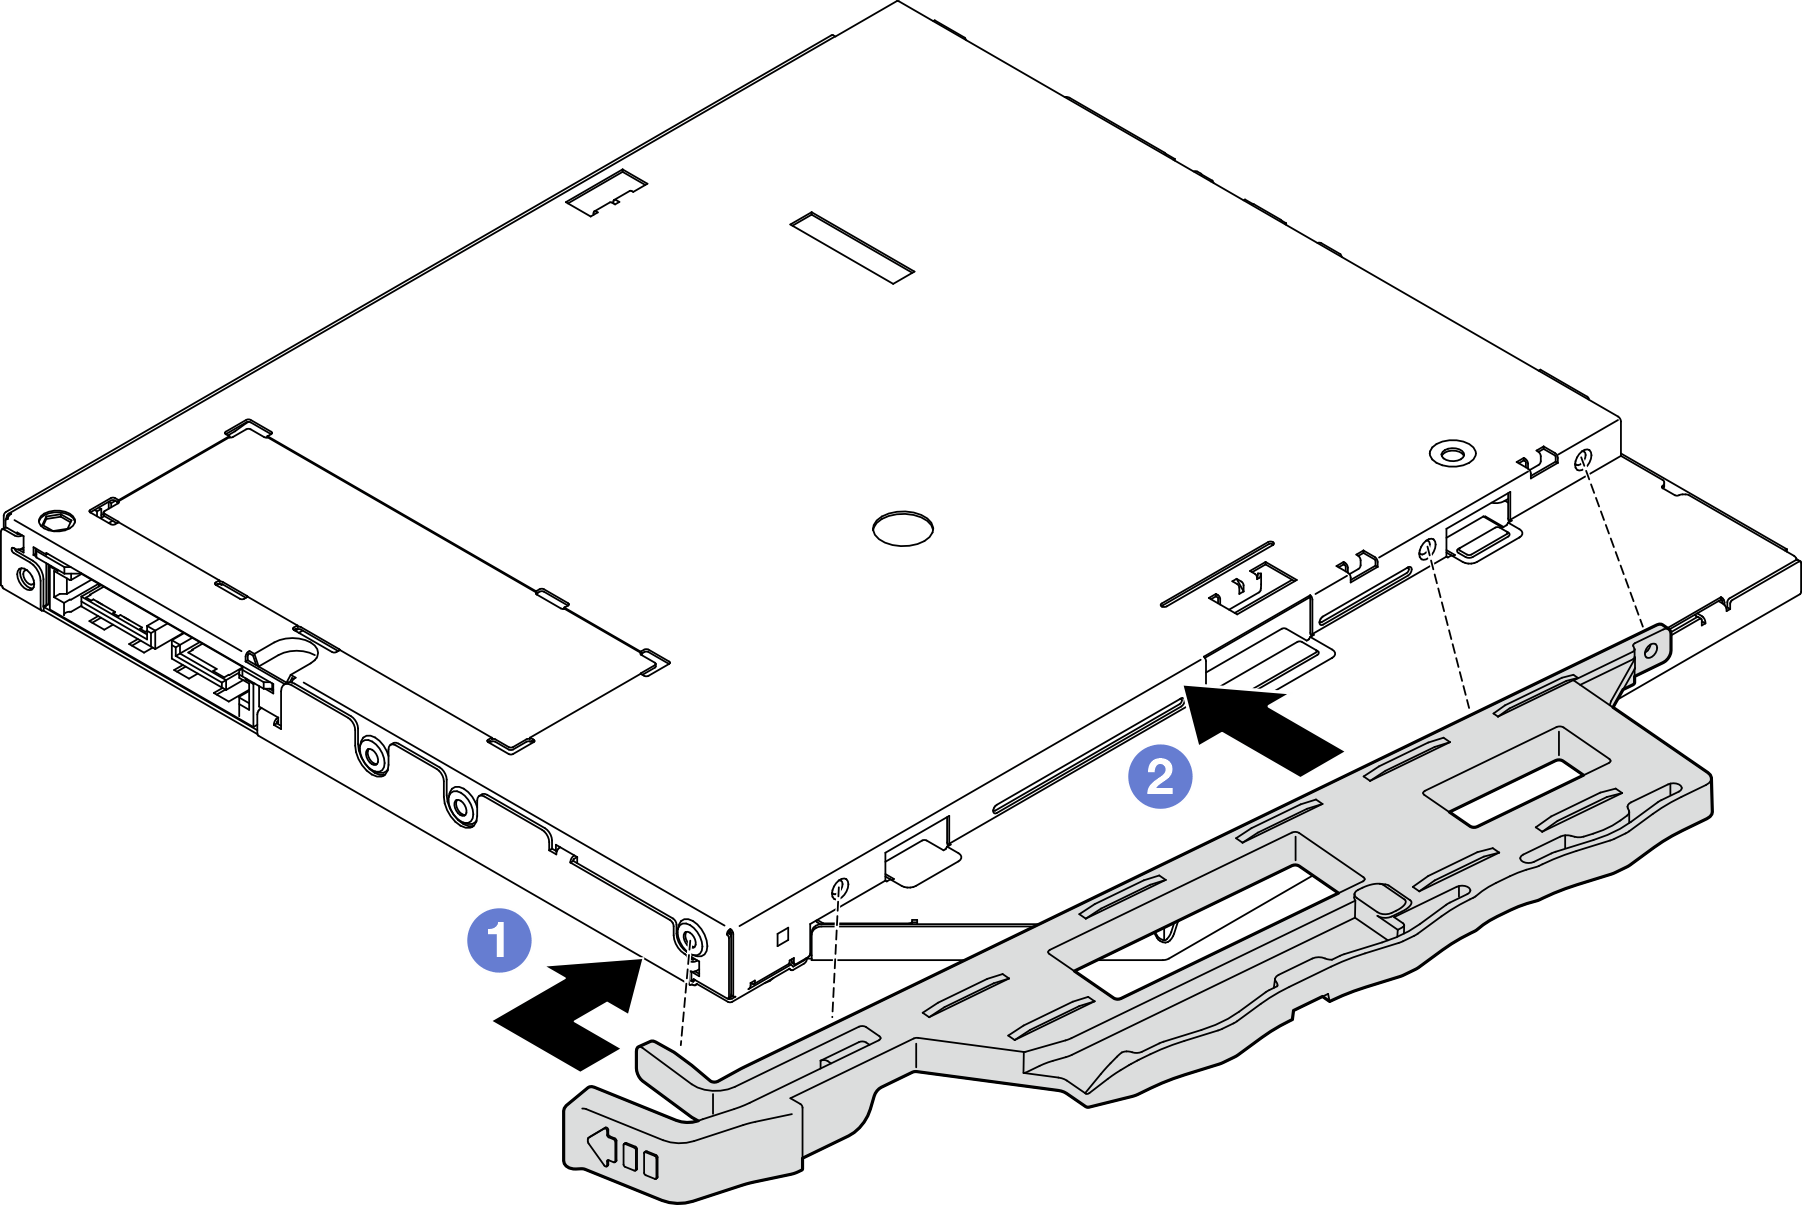 Installing the retainer to the optical drive